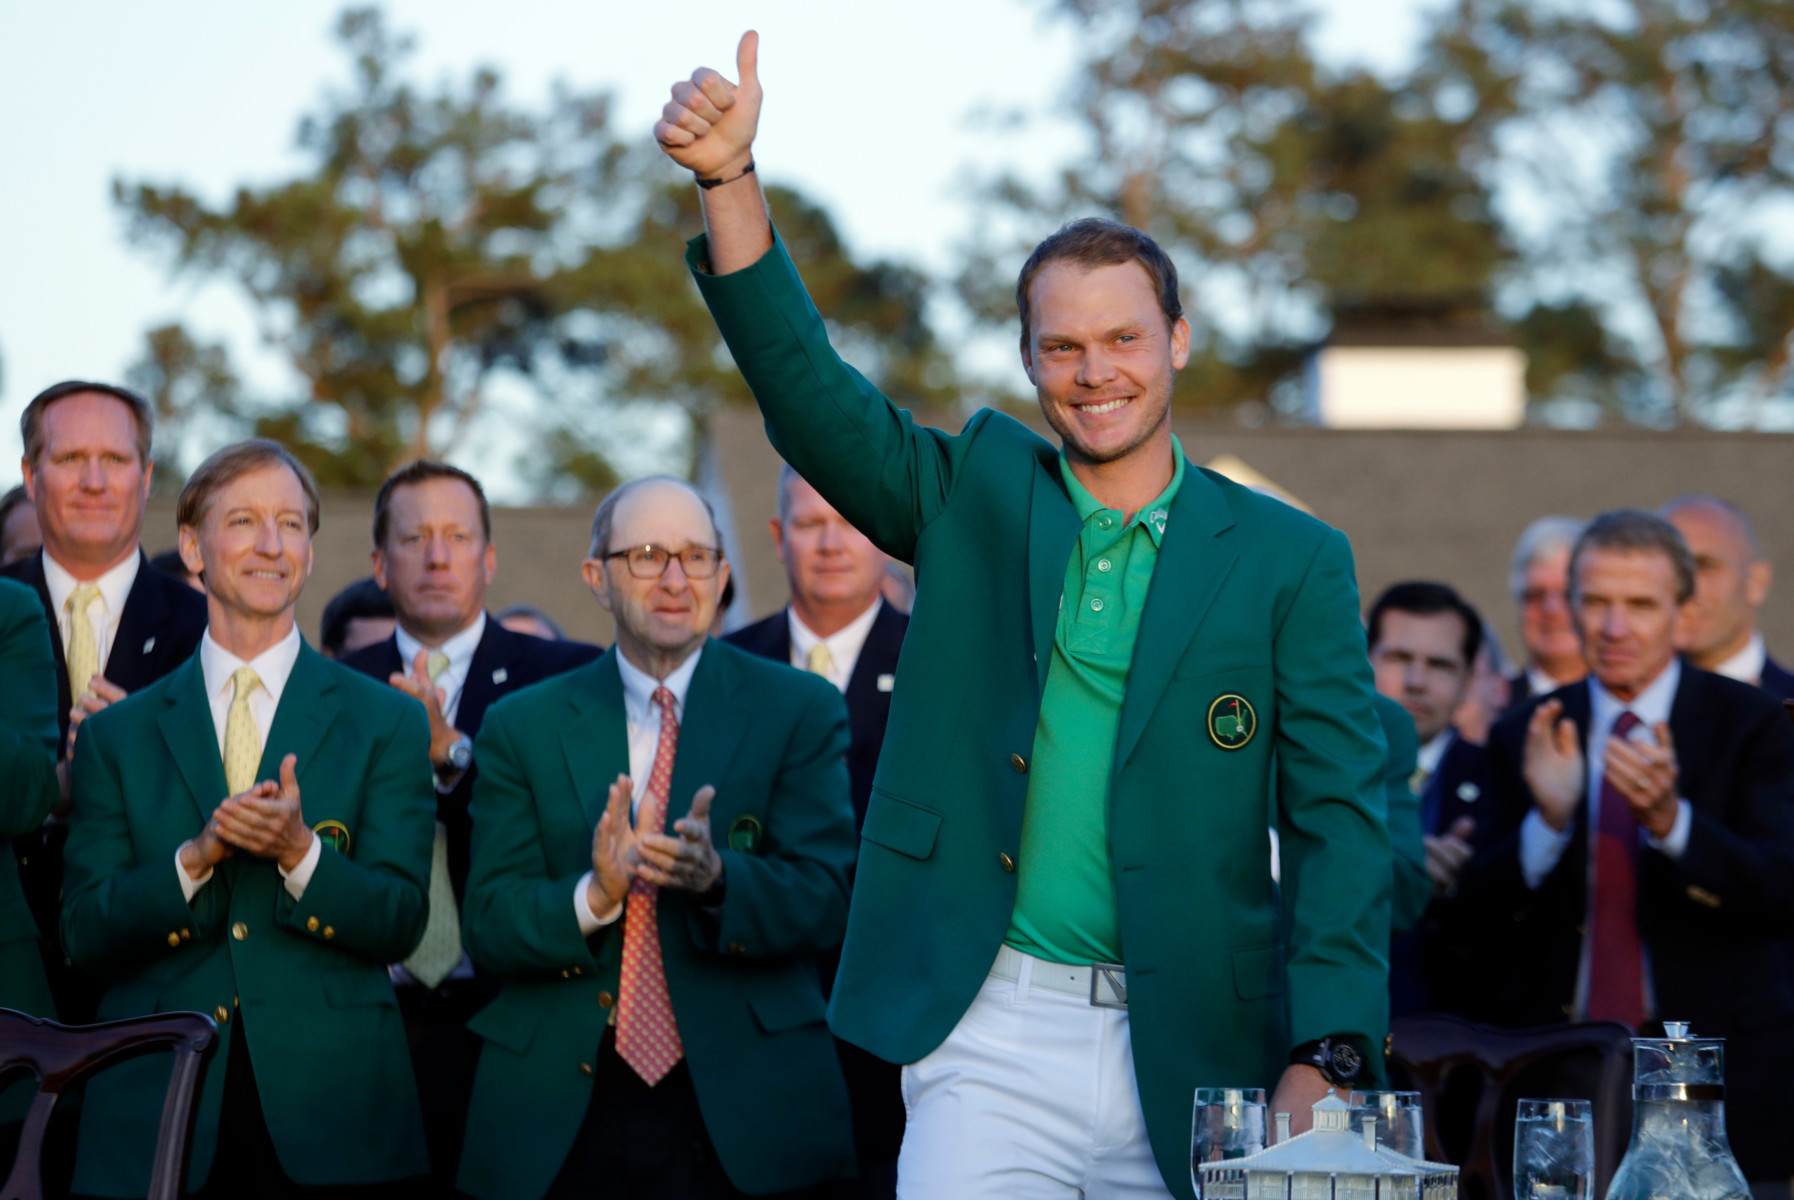 , Danny Willett reveals fans mistook him for Game of Thrones’ Theon Greyjoy… just hours after winning Masters